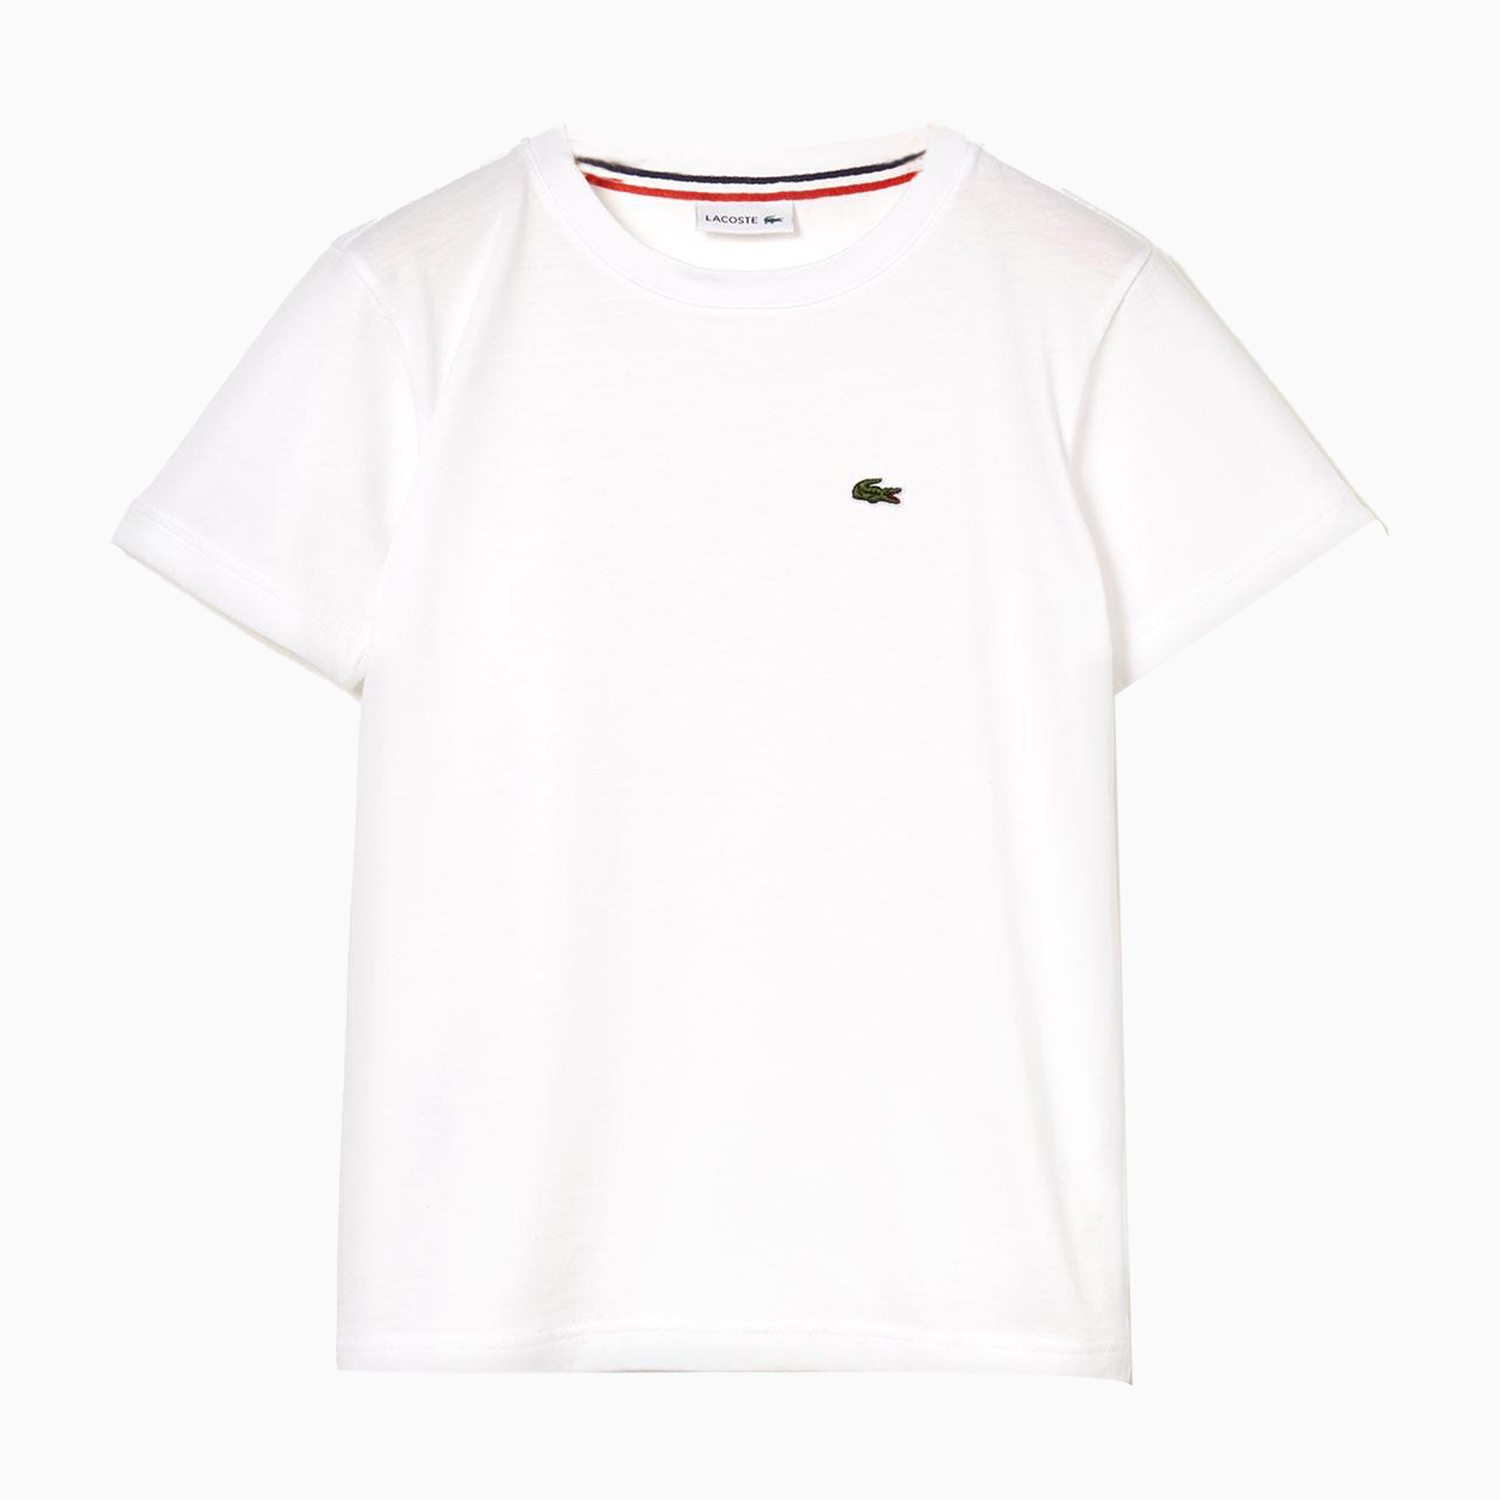 Lacoste Kid's Jersey T Shirt - Color: White - Kids Premium Clothing -